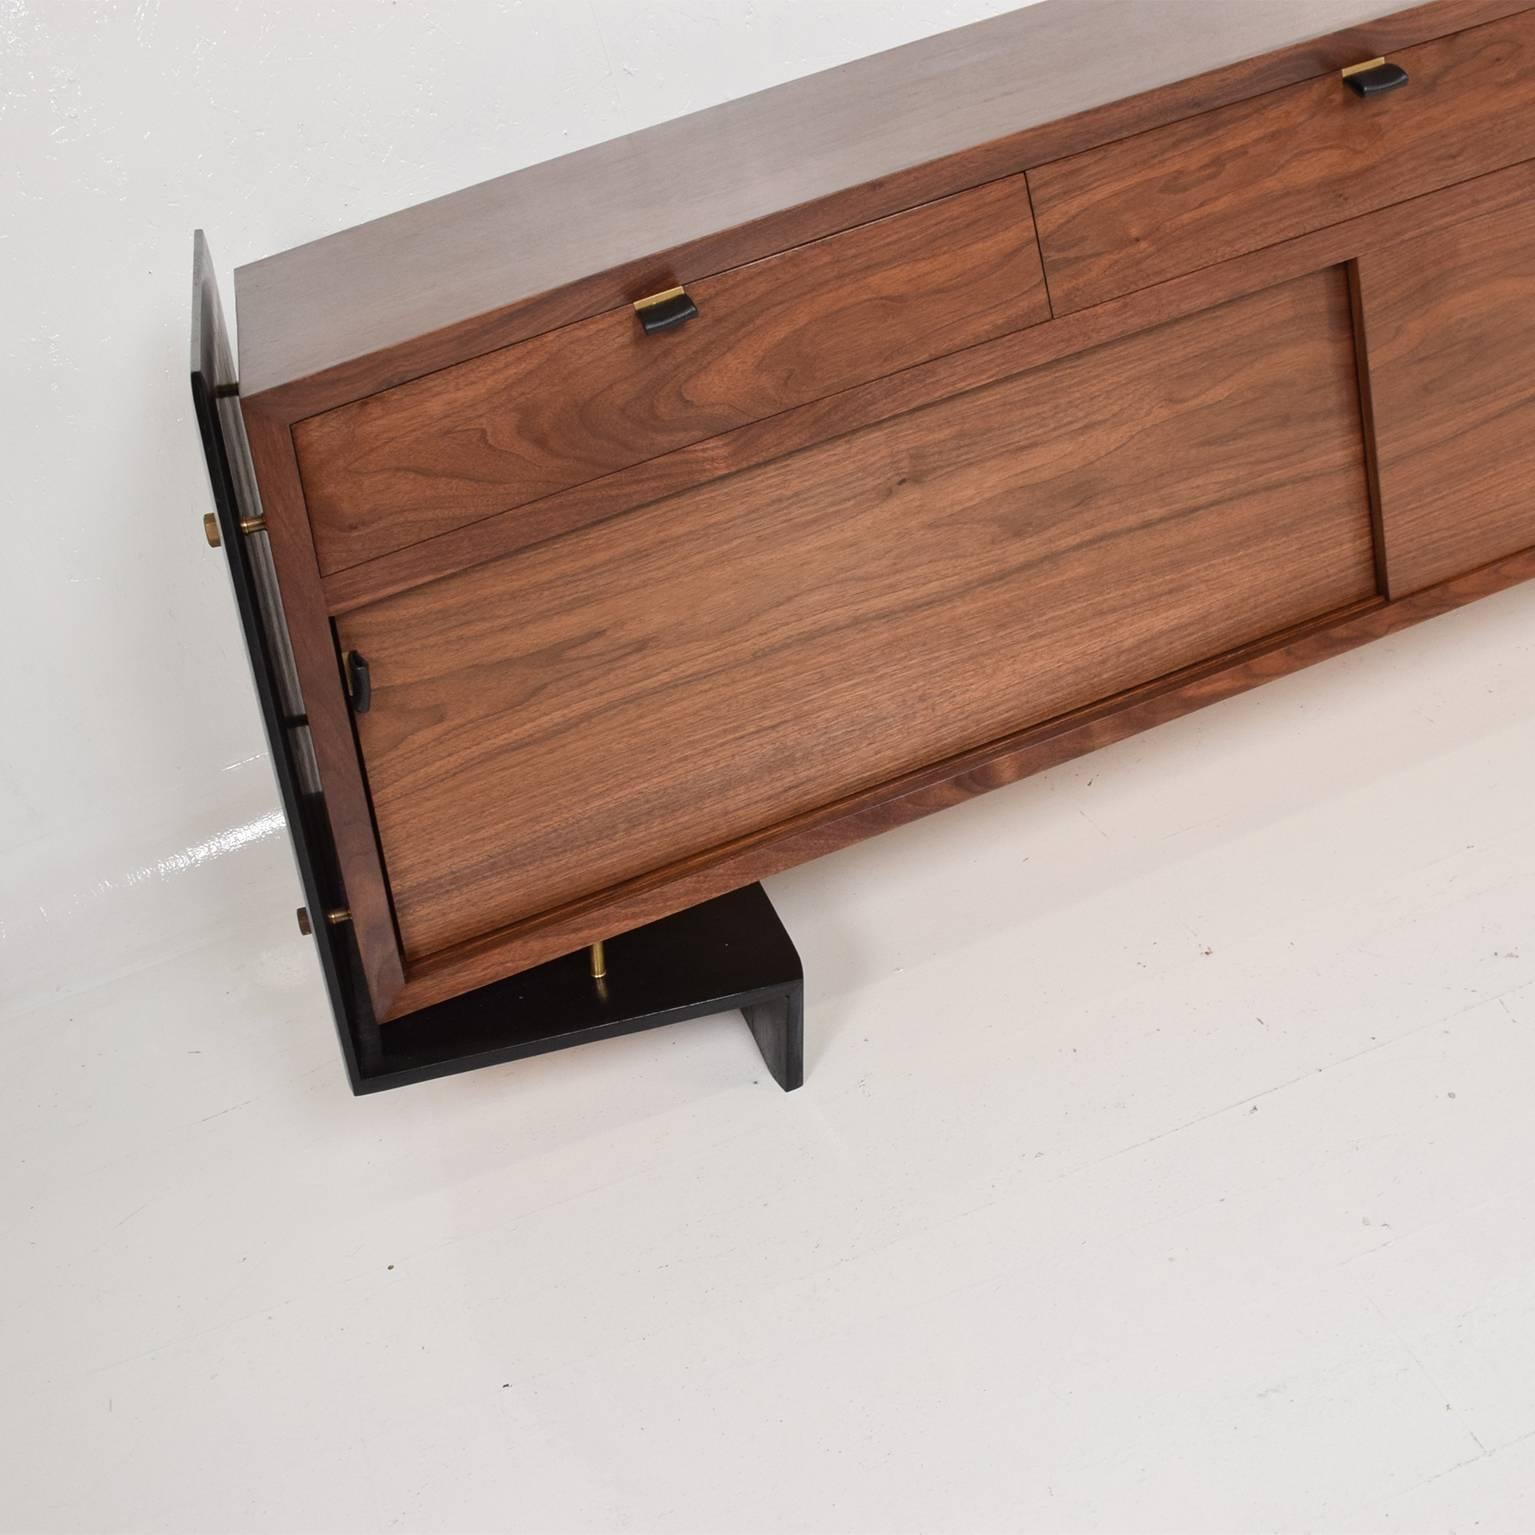 1/1 Custom Built Contemporary Sculptural Floating Credenza by Pablo Romo 3